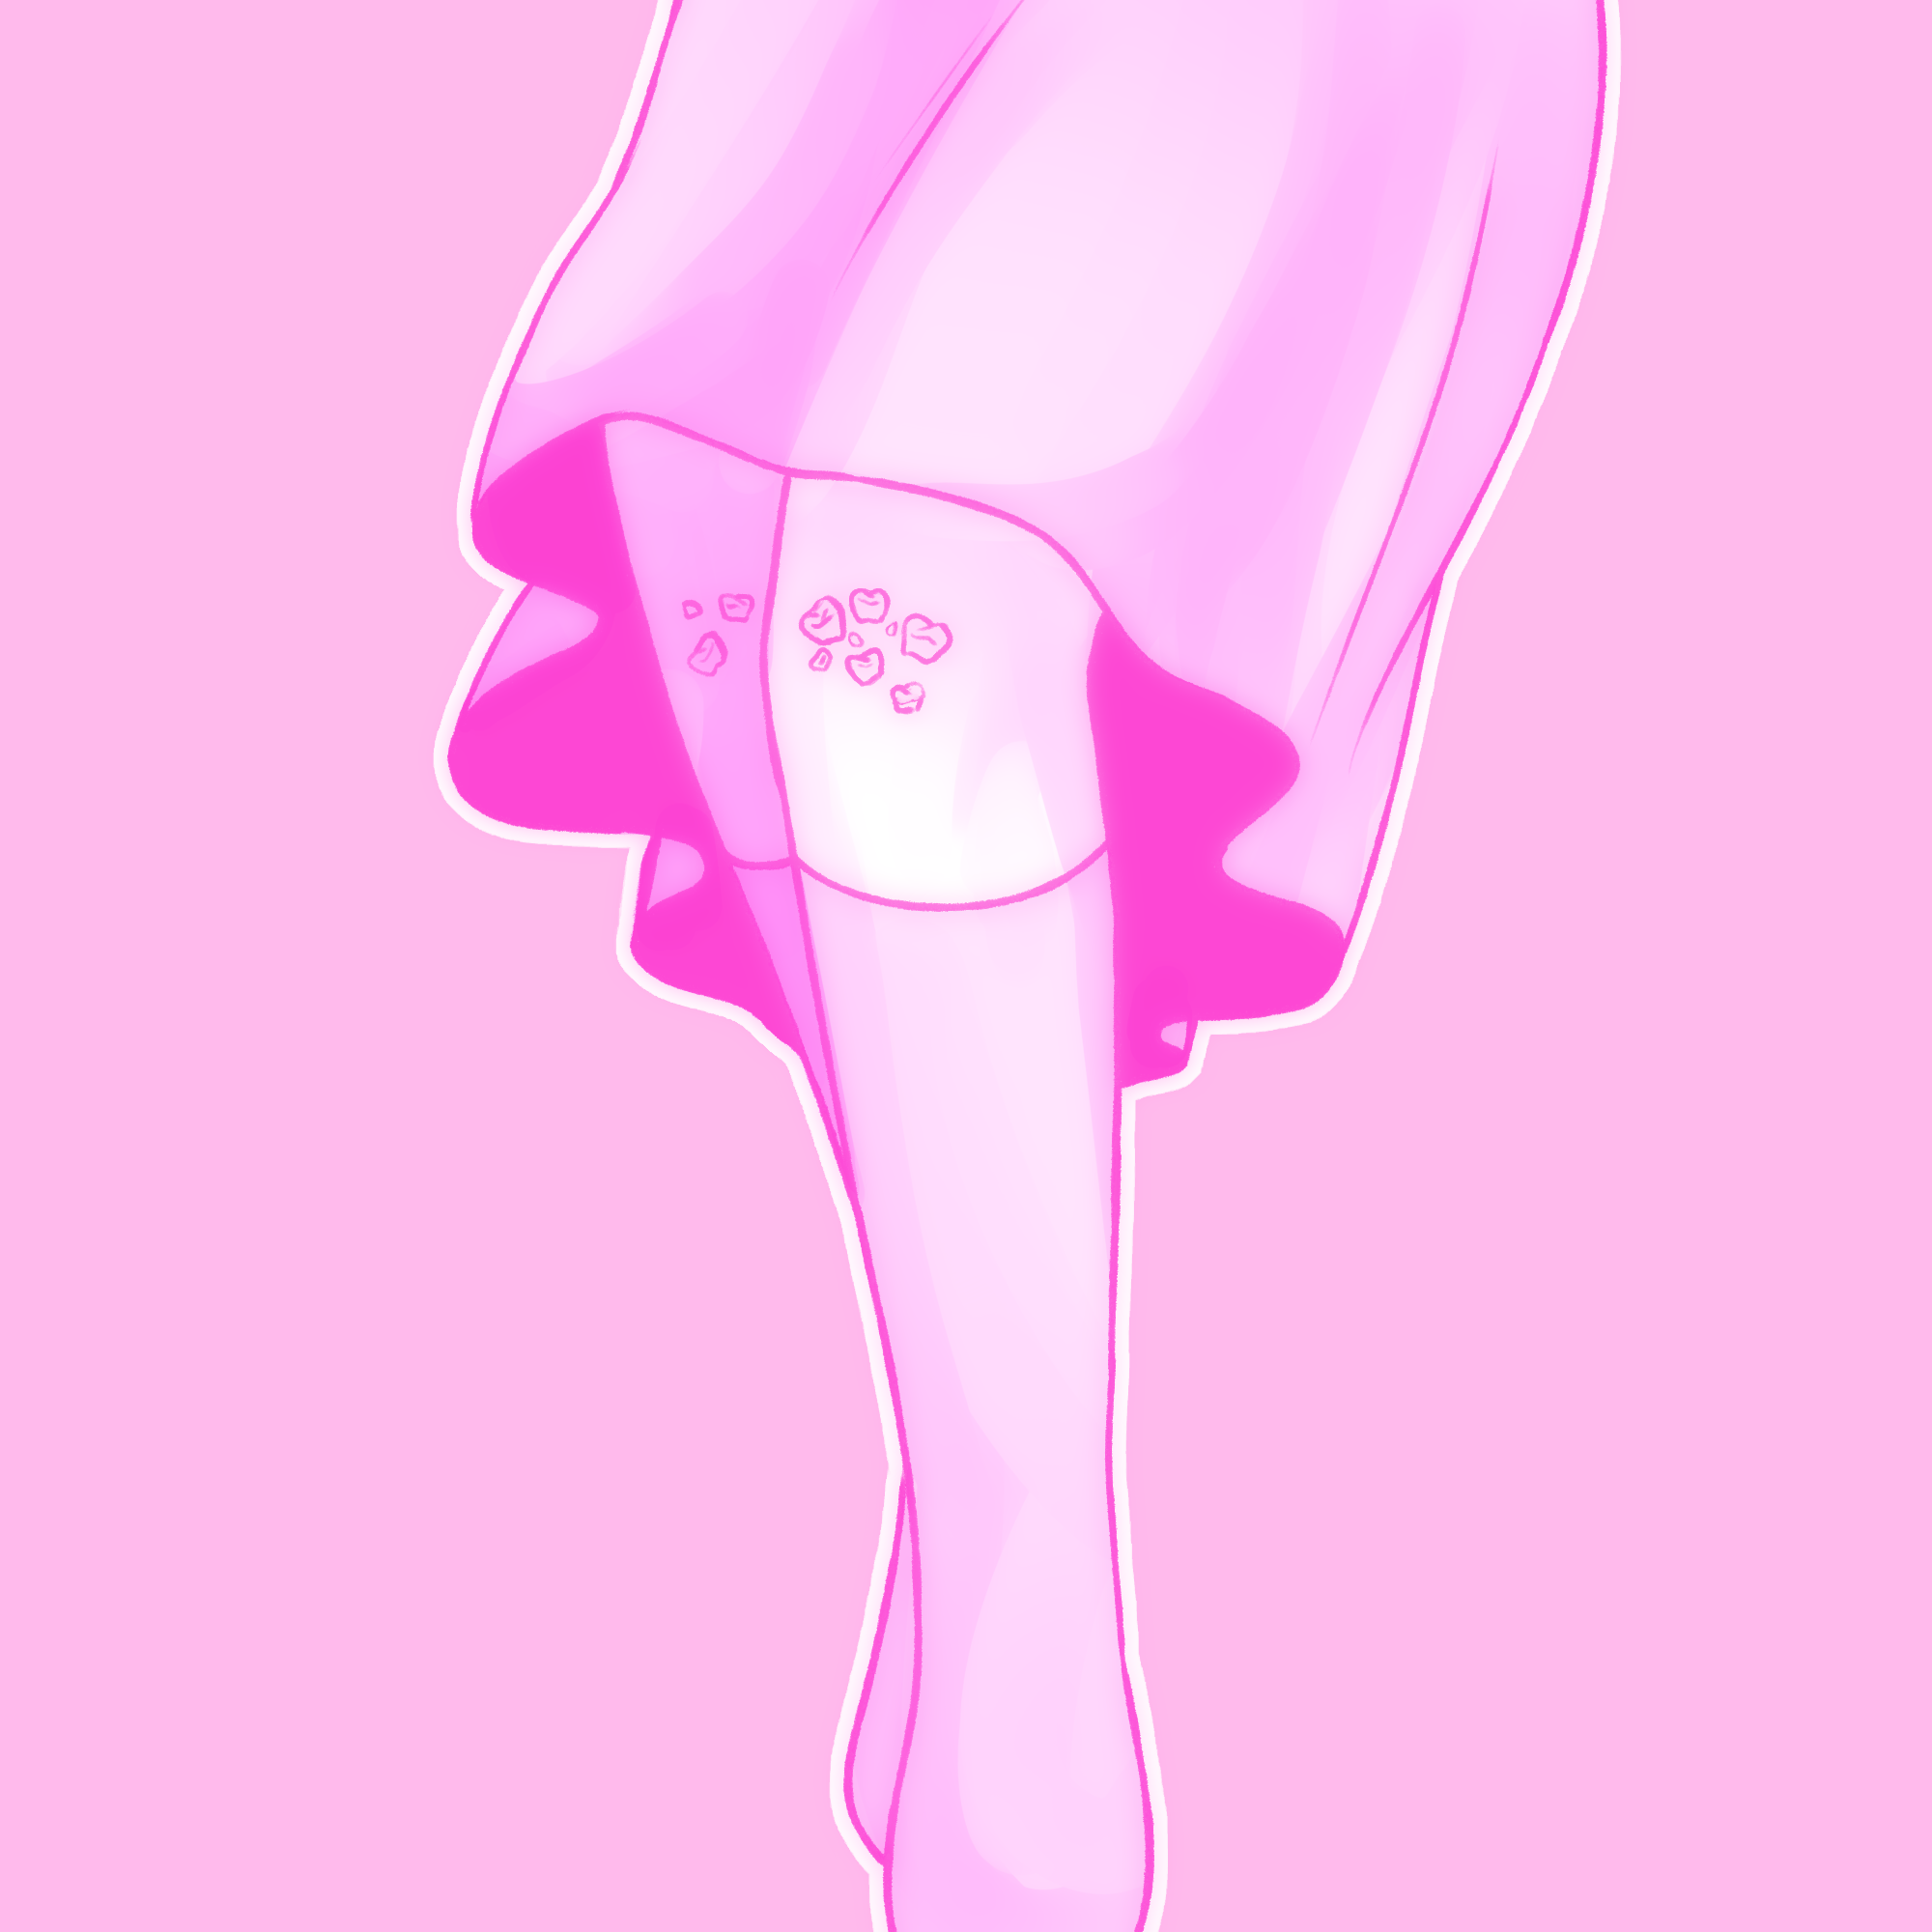 A drawing of knees with teeth. The image is mostly pink.